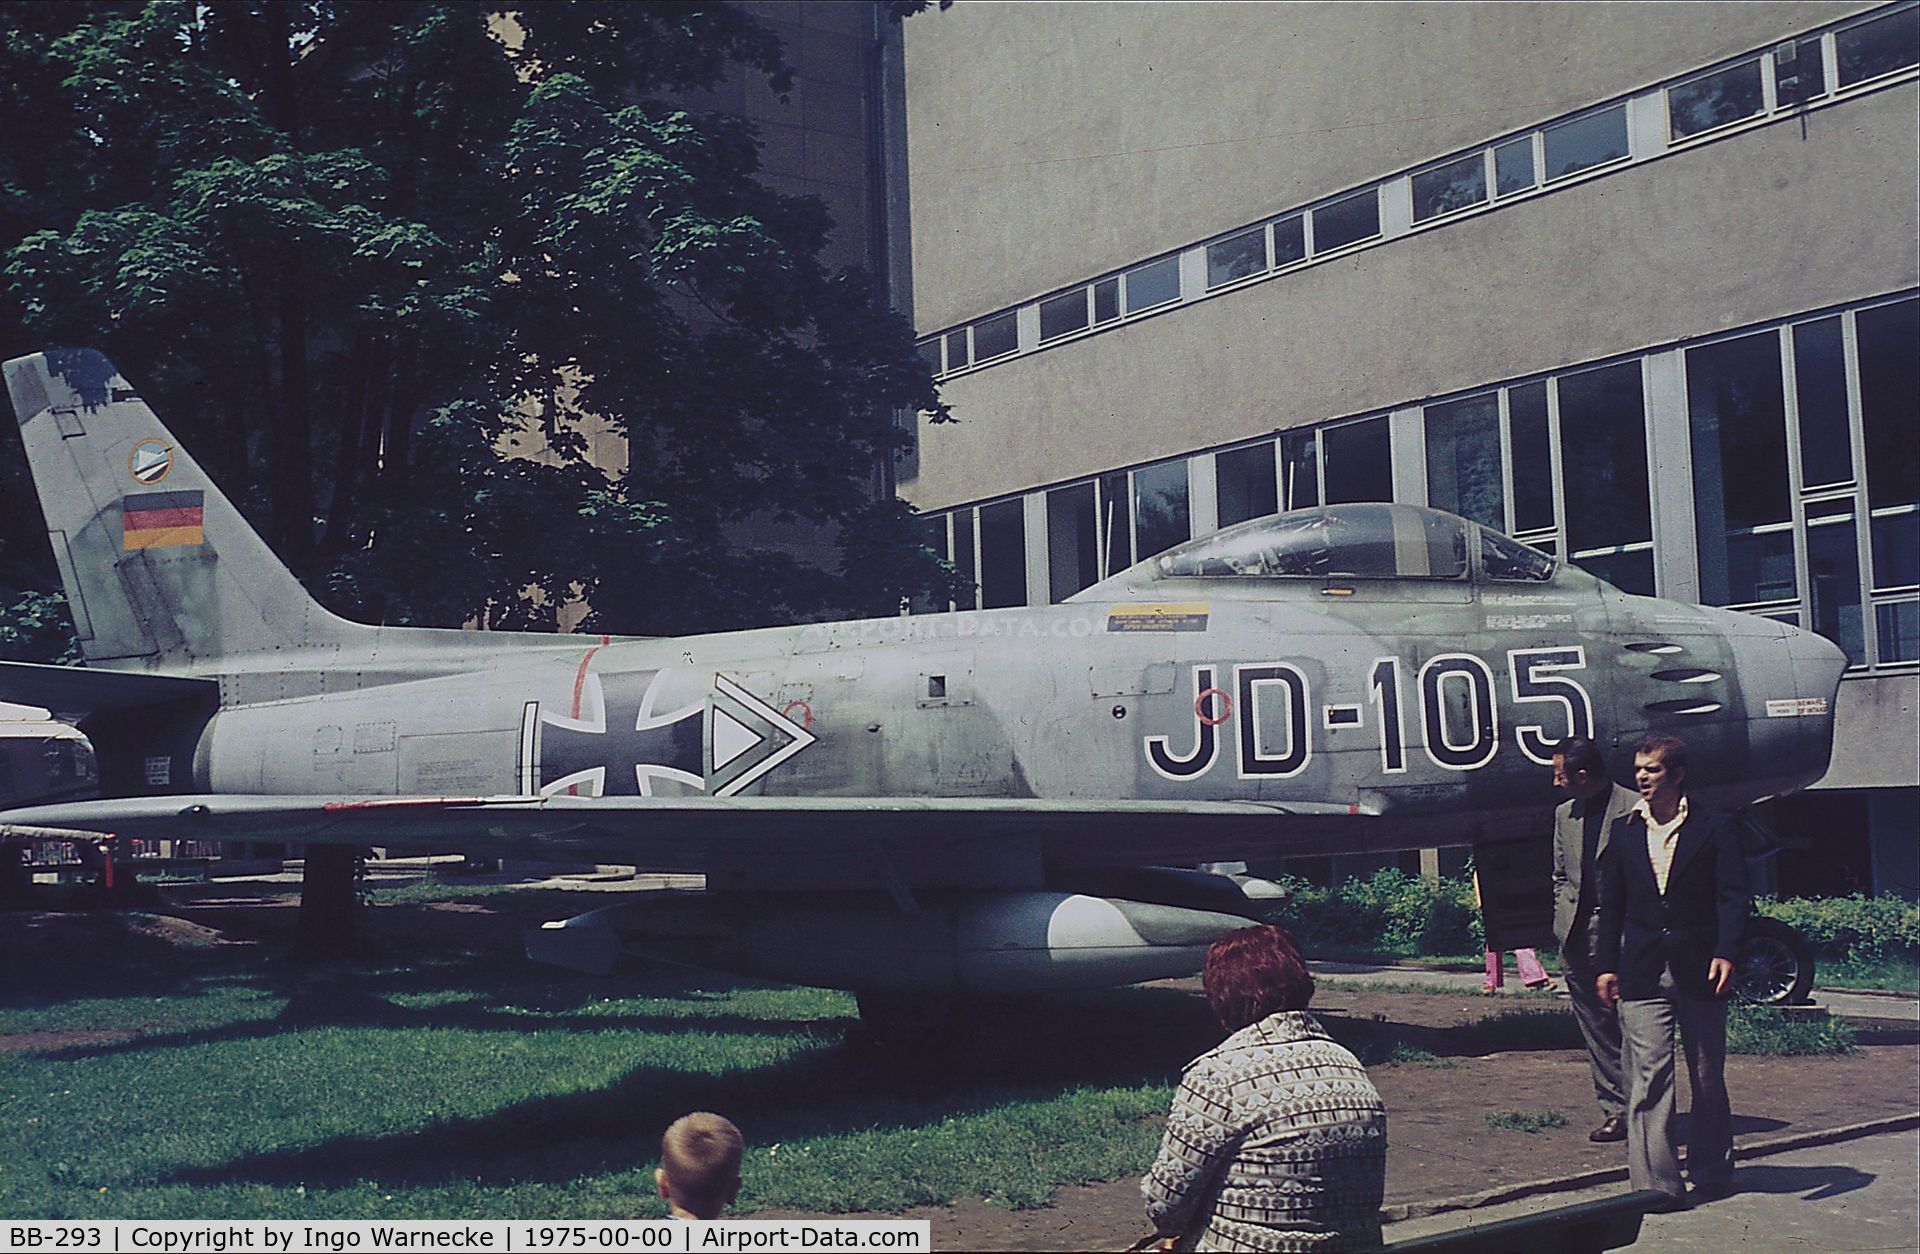 BB-293, Canadair CL-13B Sabre 6 C/N S6-1659, Canadair CL-13B Sabre 6 (North American F-86 Sabre), displayed as JD-105 outside in the park of the Deutsches Museum Museumsinsel, München